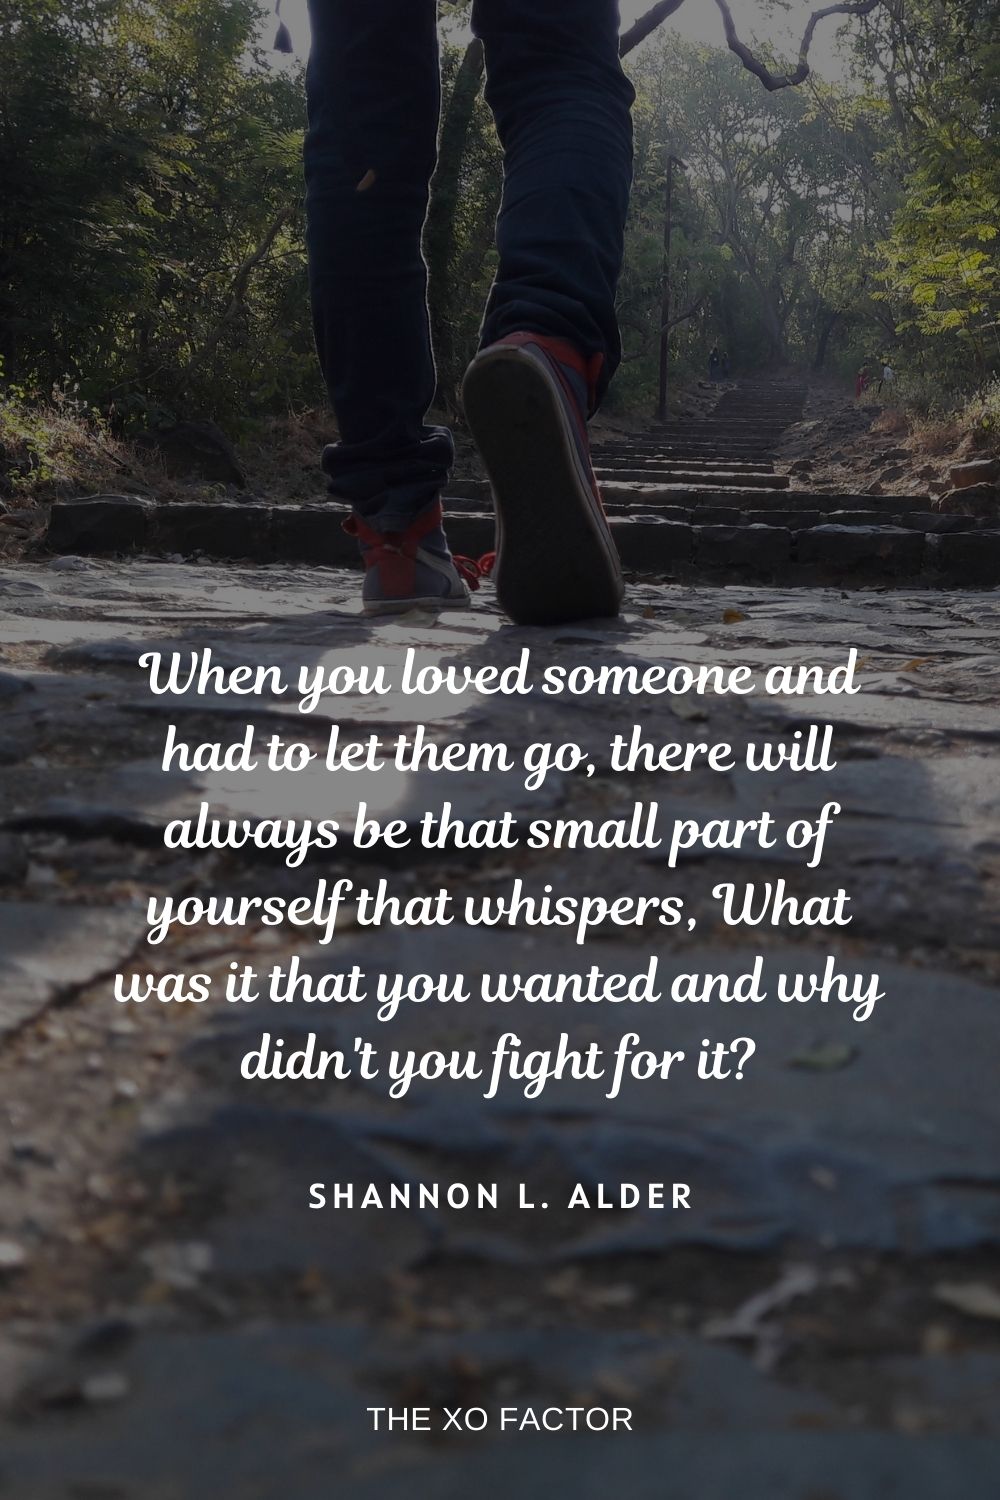 When you loved someone and had to let them go, there will always be that small part of yourself that whispers, What was it that you wanted and why didn't you fight for it? Shannon L. Alder